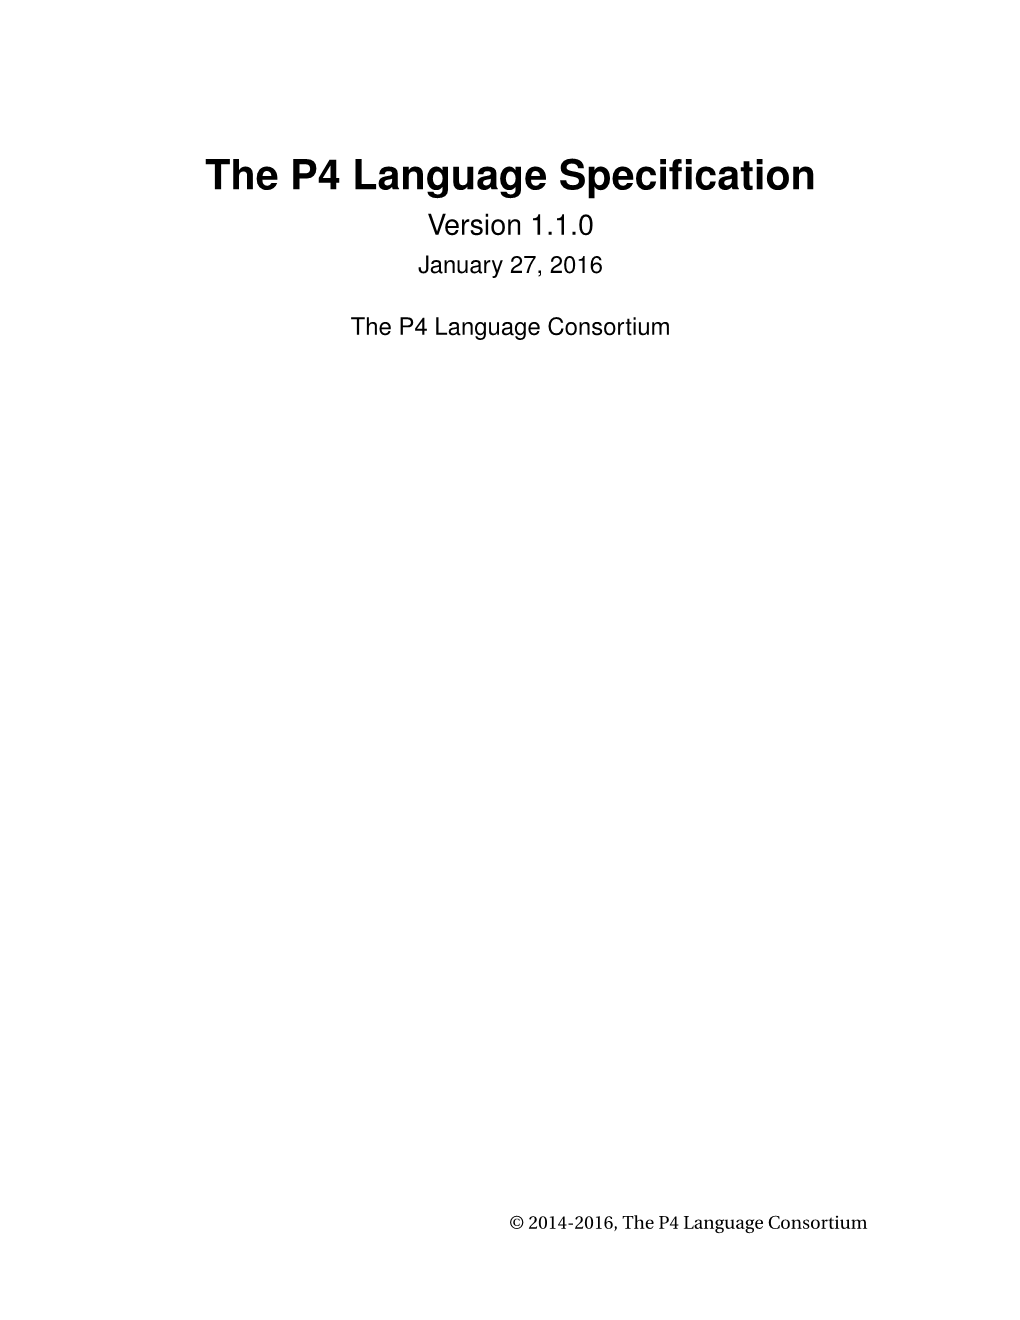 The P4 Language Specification, V 1.1.0